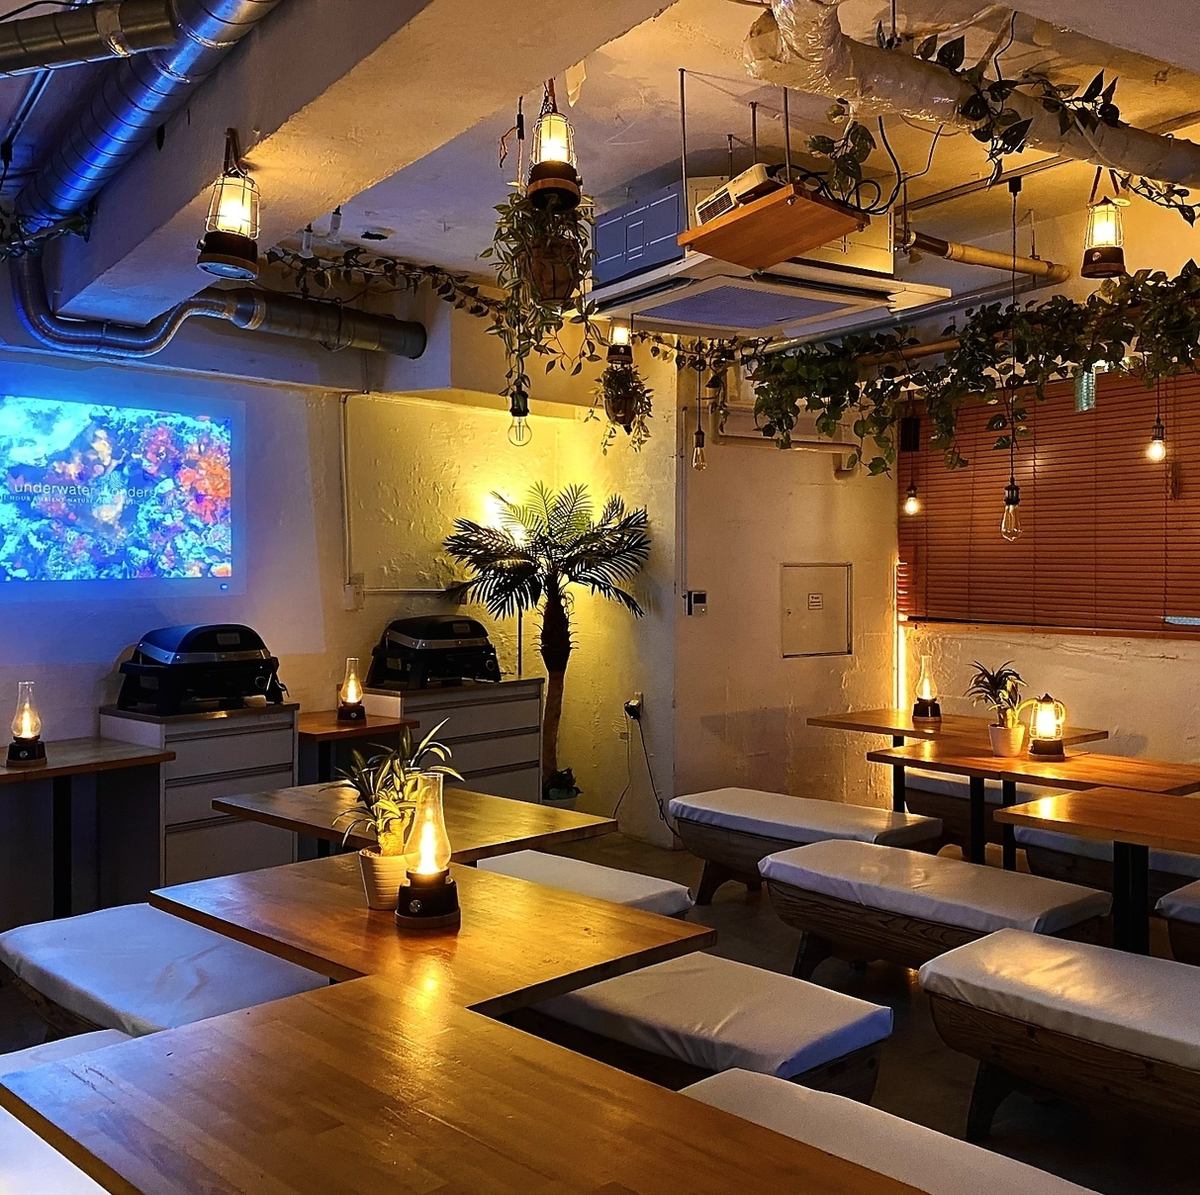 Speaking of charters near Shibuya Station, "Shibuya Garden Hall"! It is possible to charter from 25 people! It is perfect for charter parties because it is equipped with projectors and microphones (^ ^)/